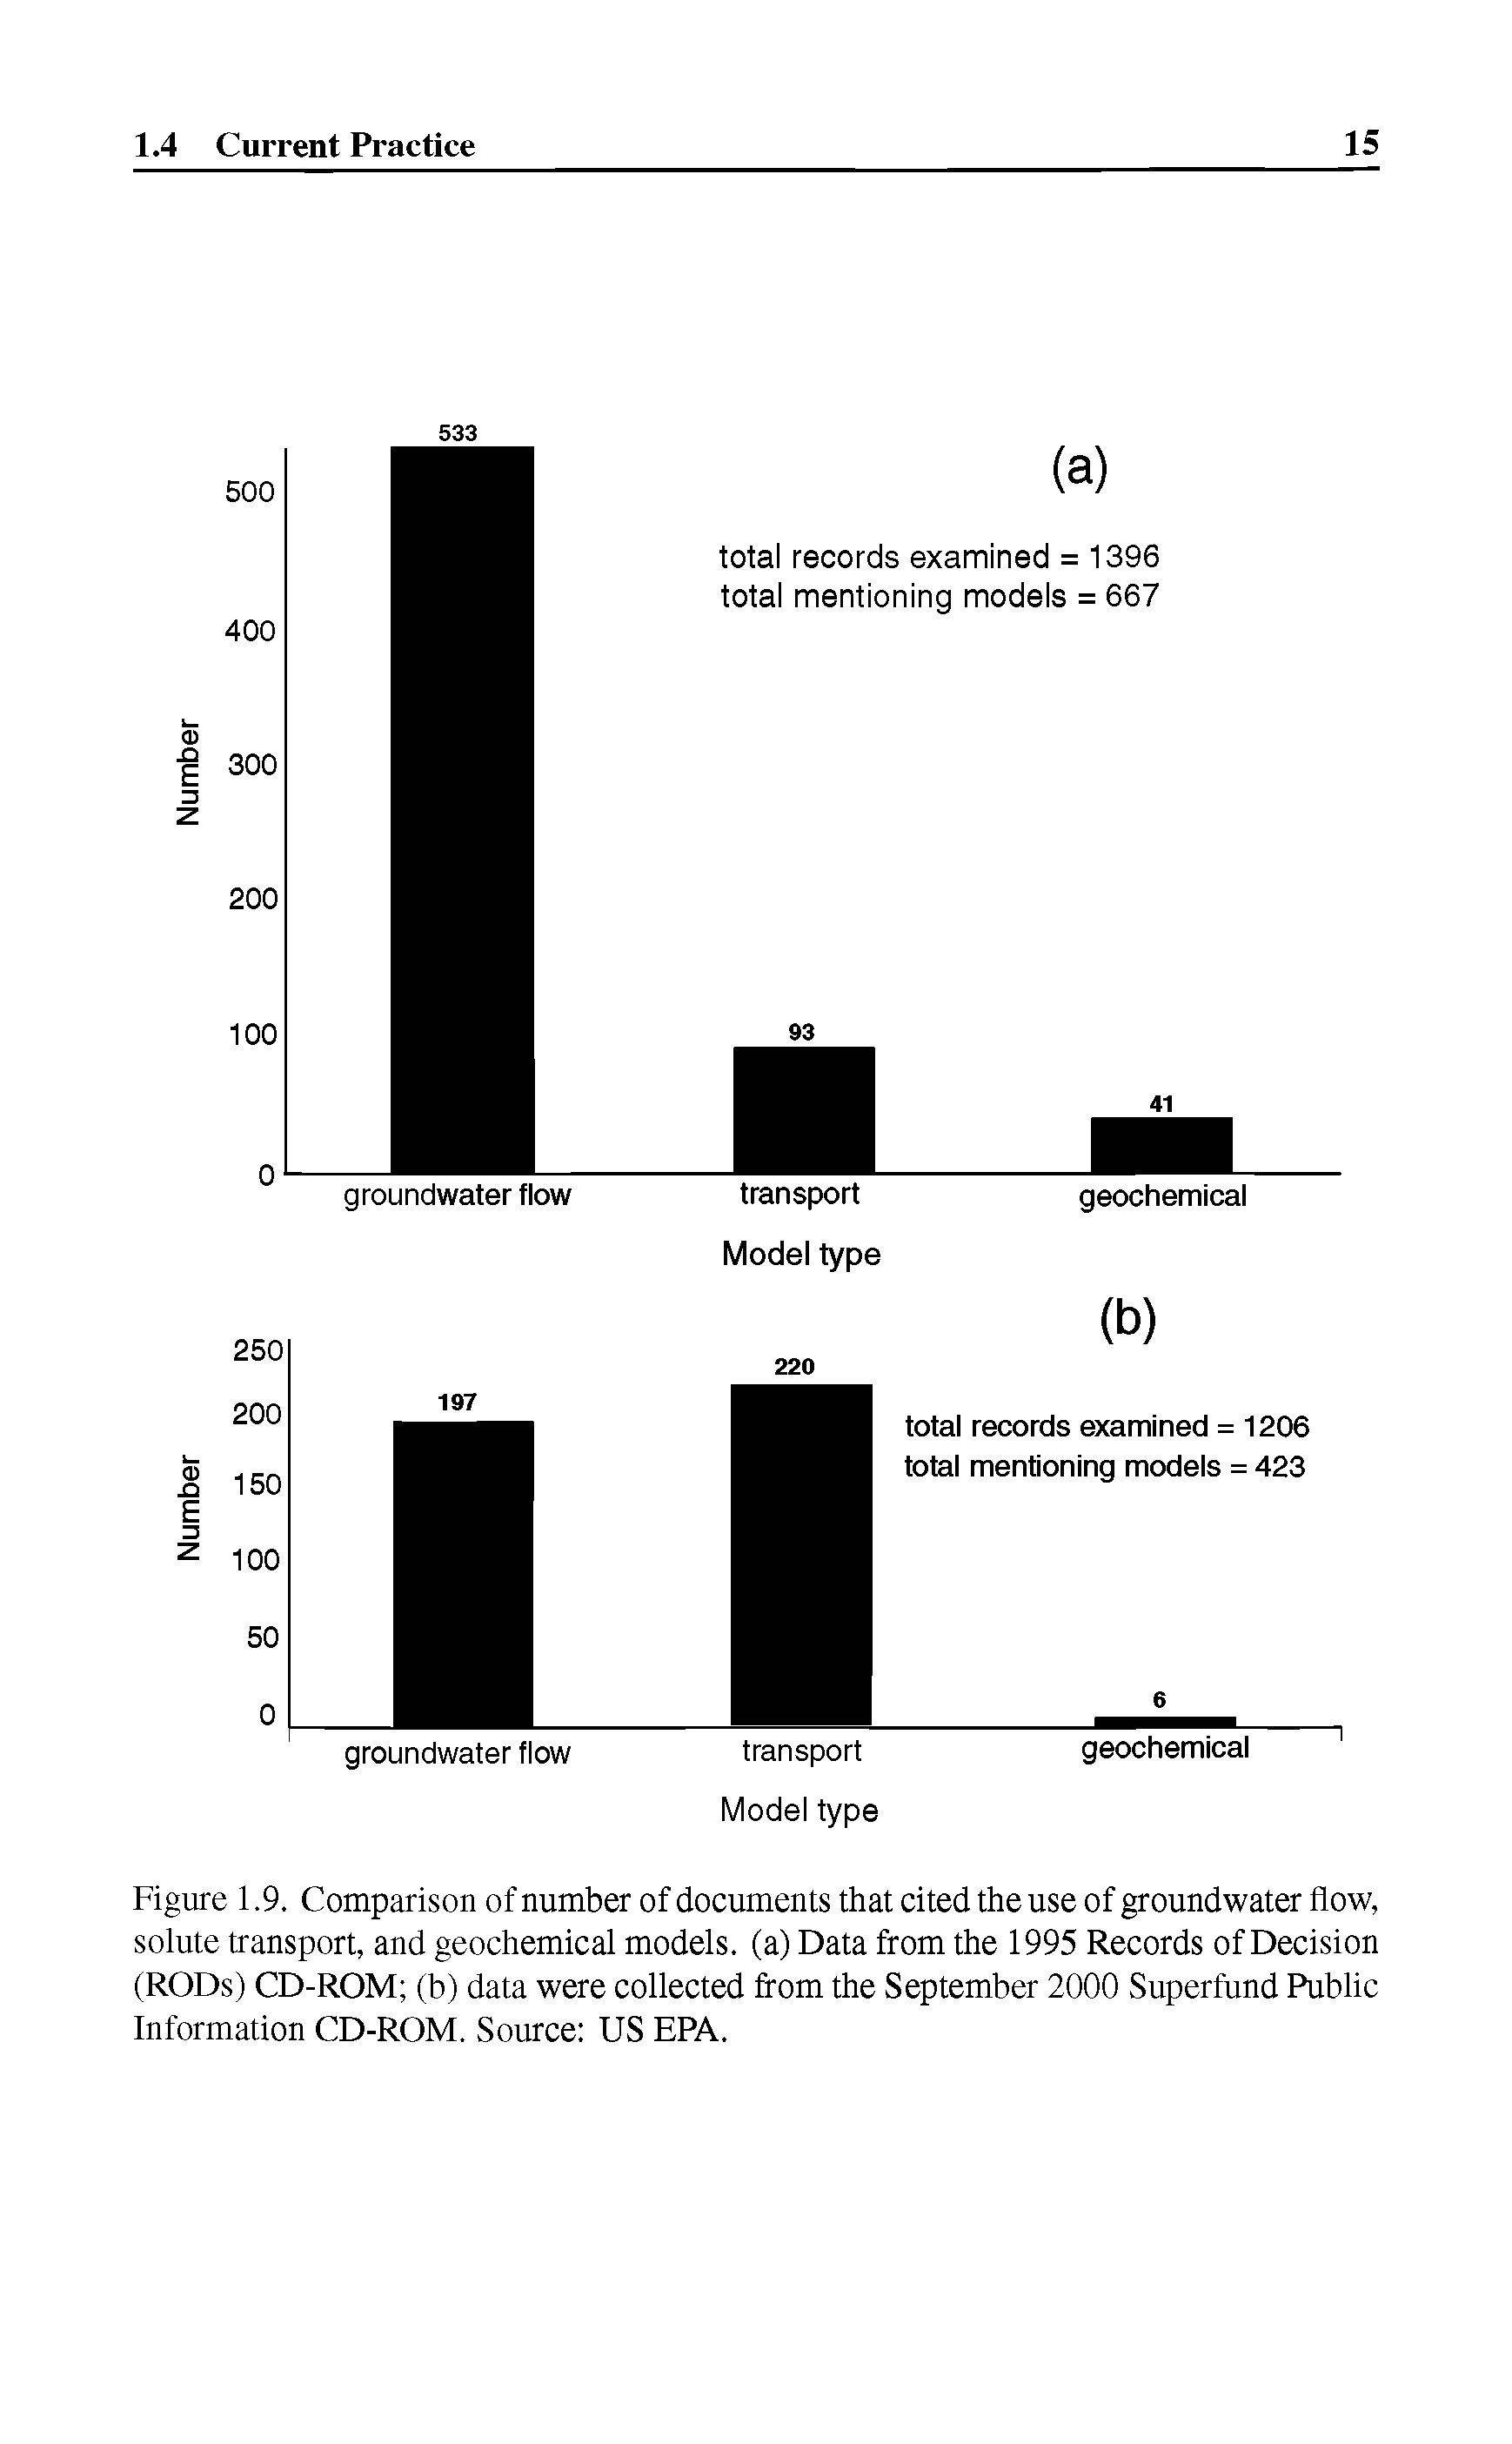 Figure 1.9. Comparison of number of documents that cited the use of groundwater flow, solute transport, and geochemical models, (a) Data from the 1995 Records of Decision (RODs) CD-ROM (b) data were collected from the September 2000 Superfund Public Information CD-ROM. Source US EPA.